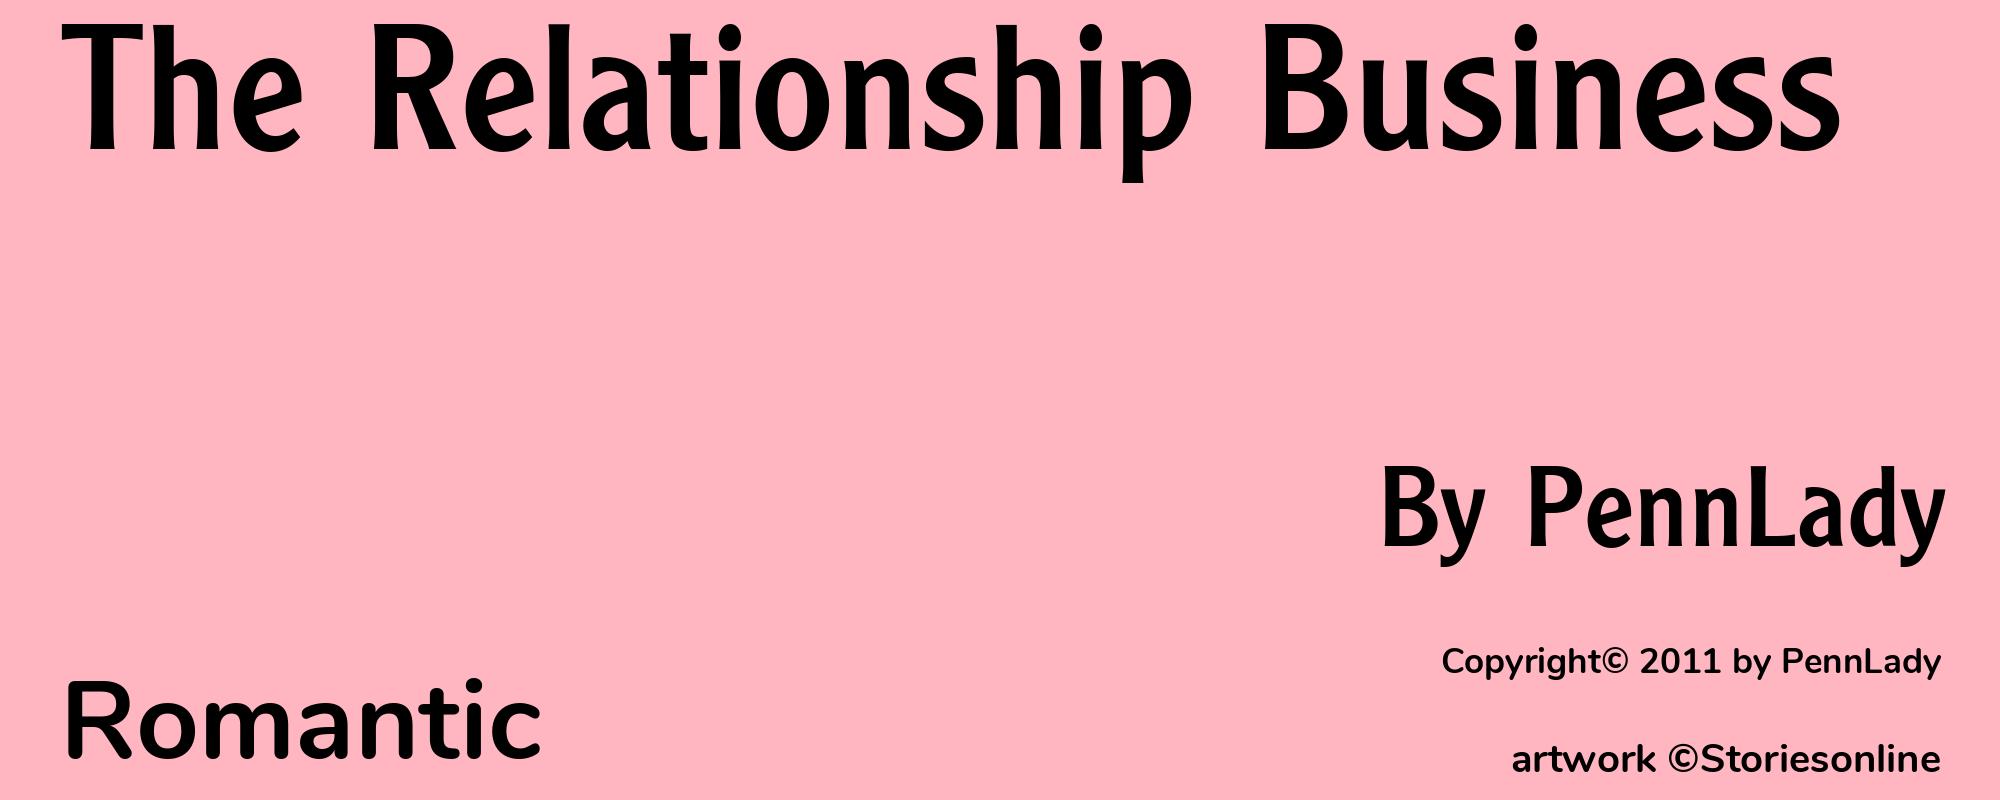 The Relationship Business - Cover